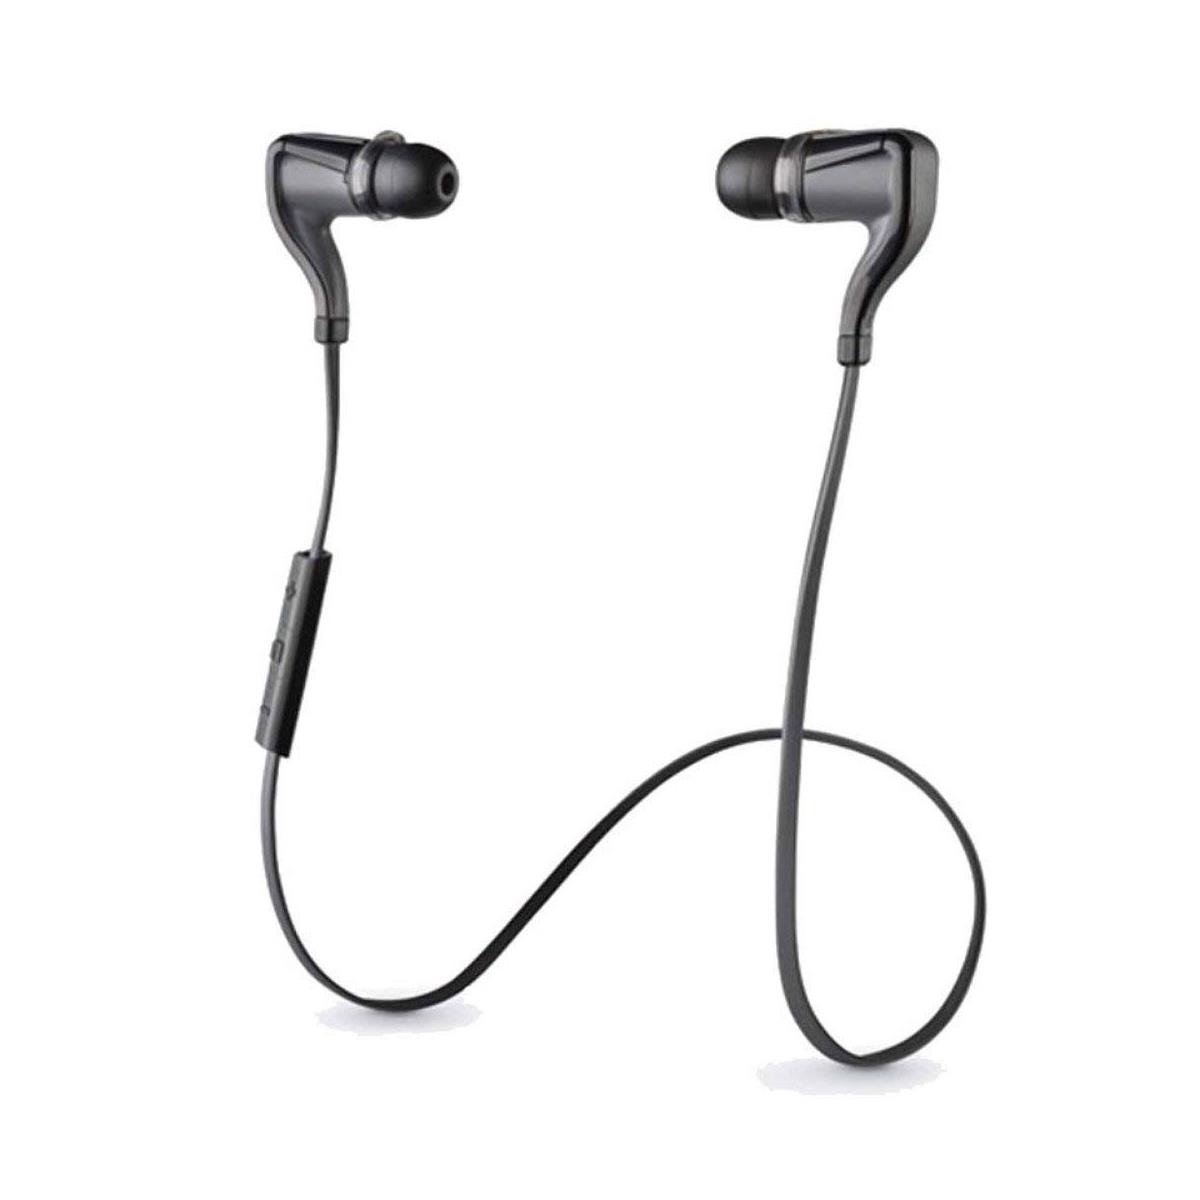 Image of Plantronics BackBeat GO 2 Wireless Earbuds with Portable Charging Case